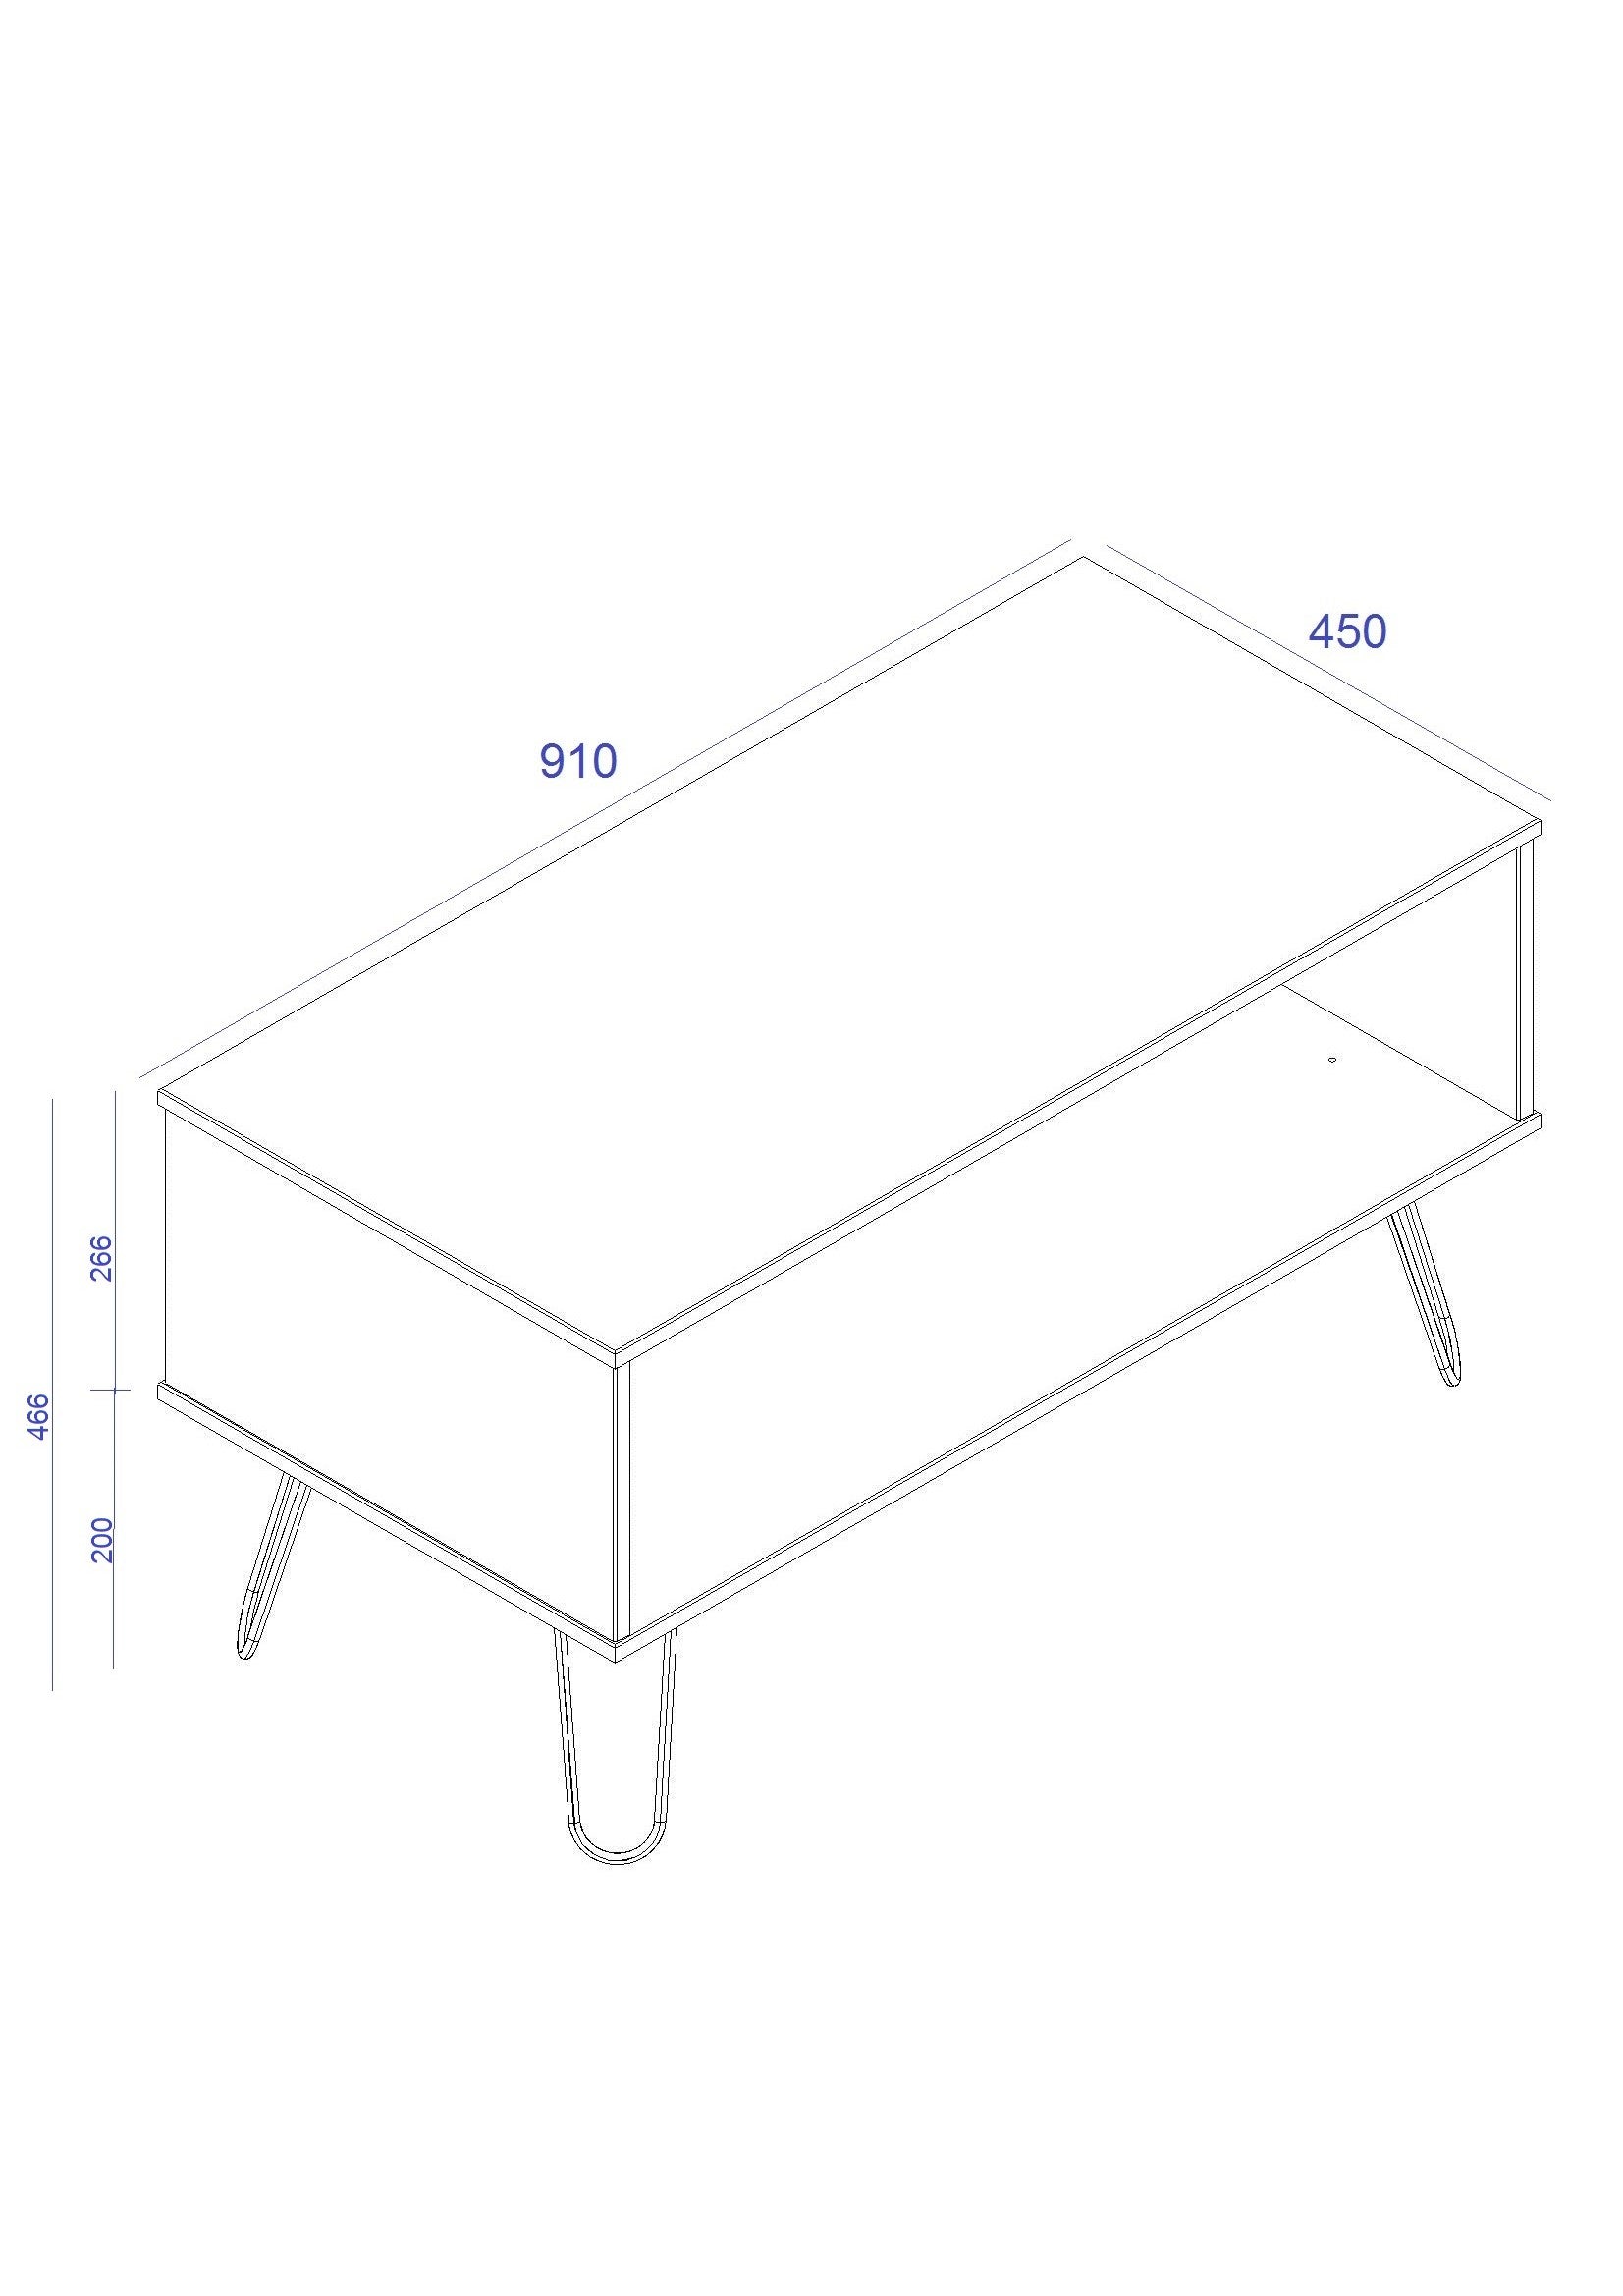 Open Coffee Table